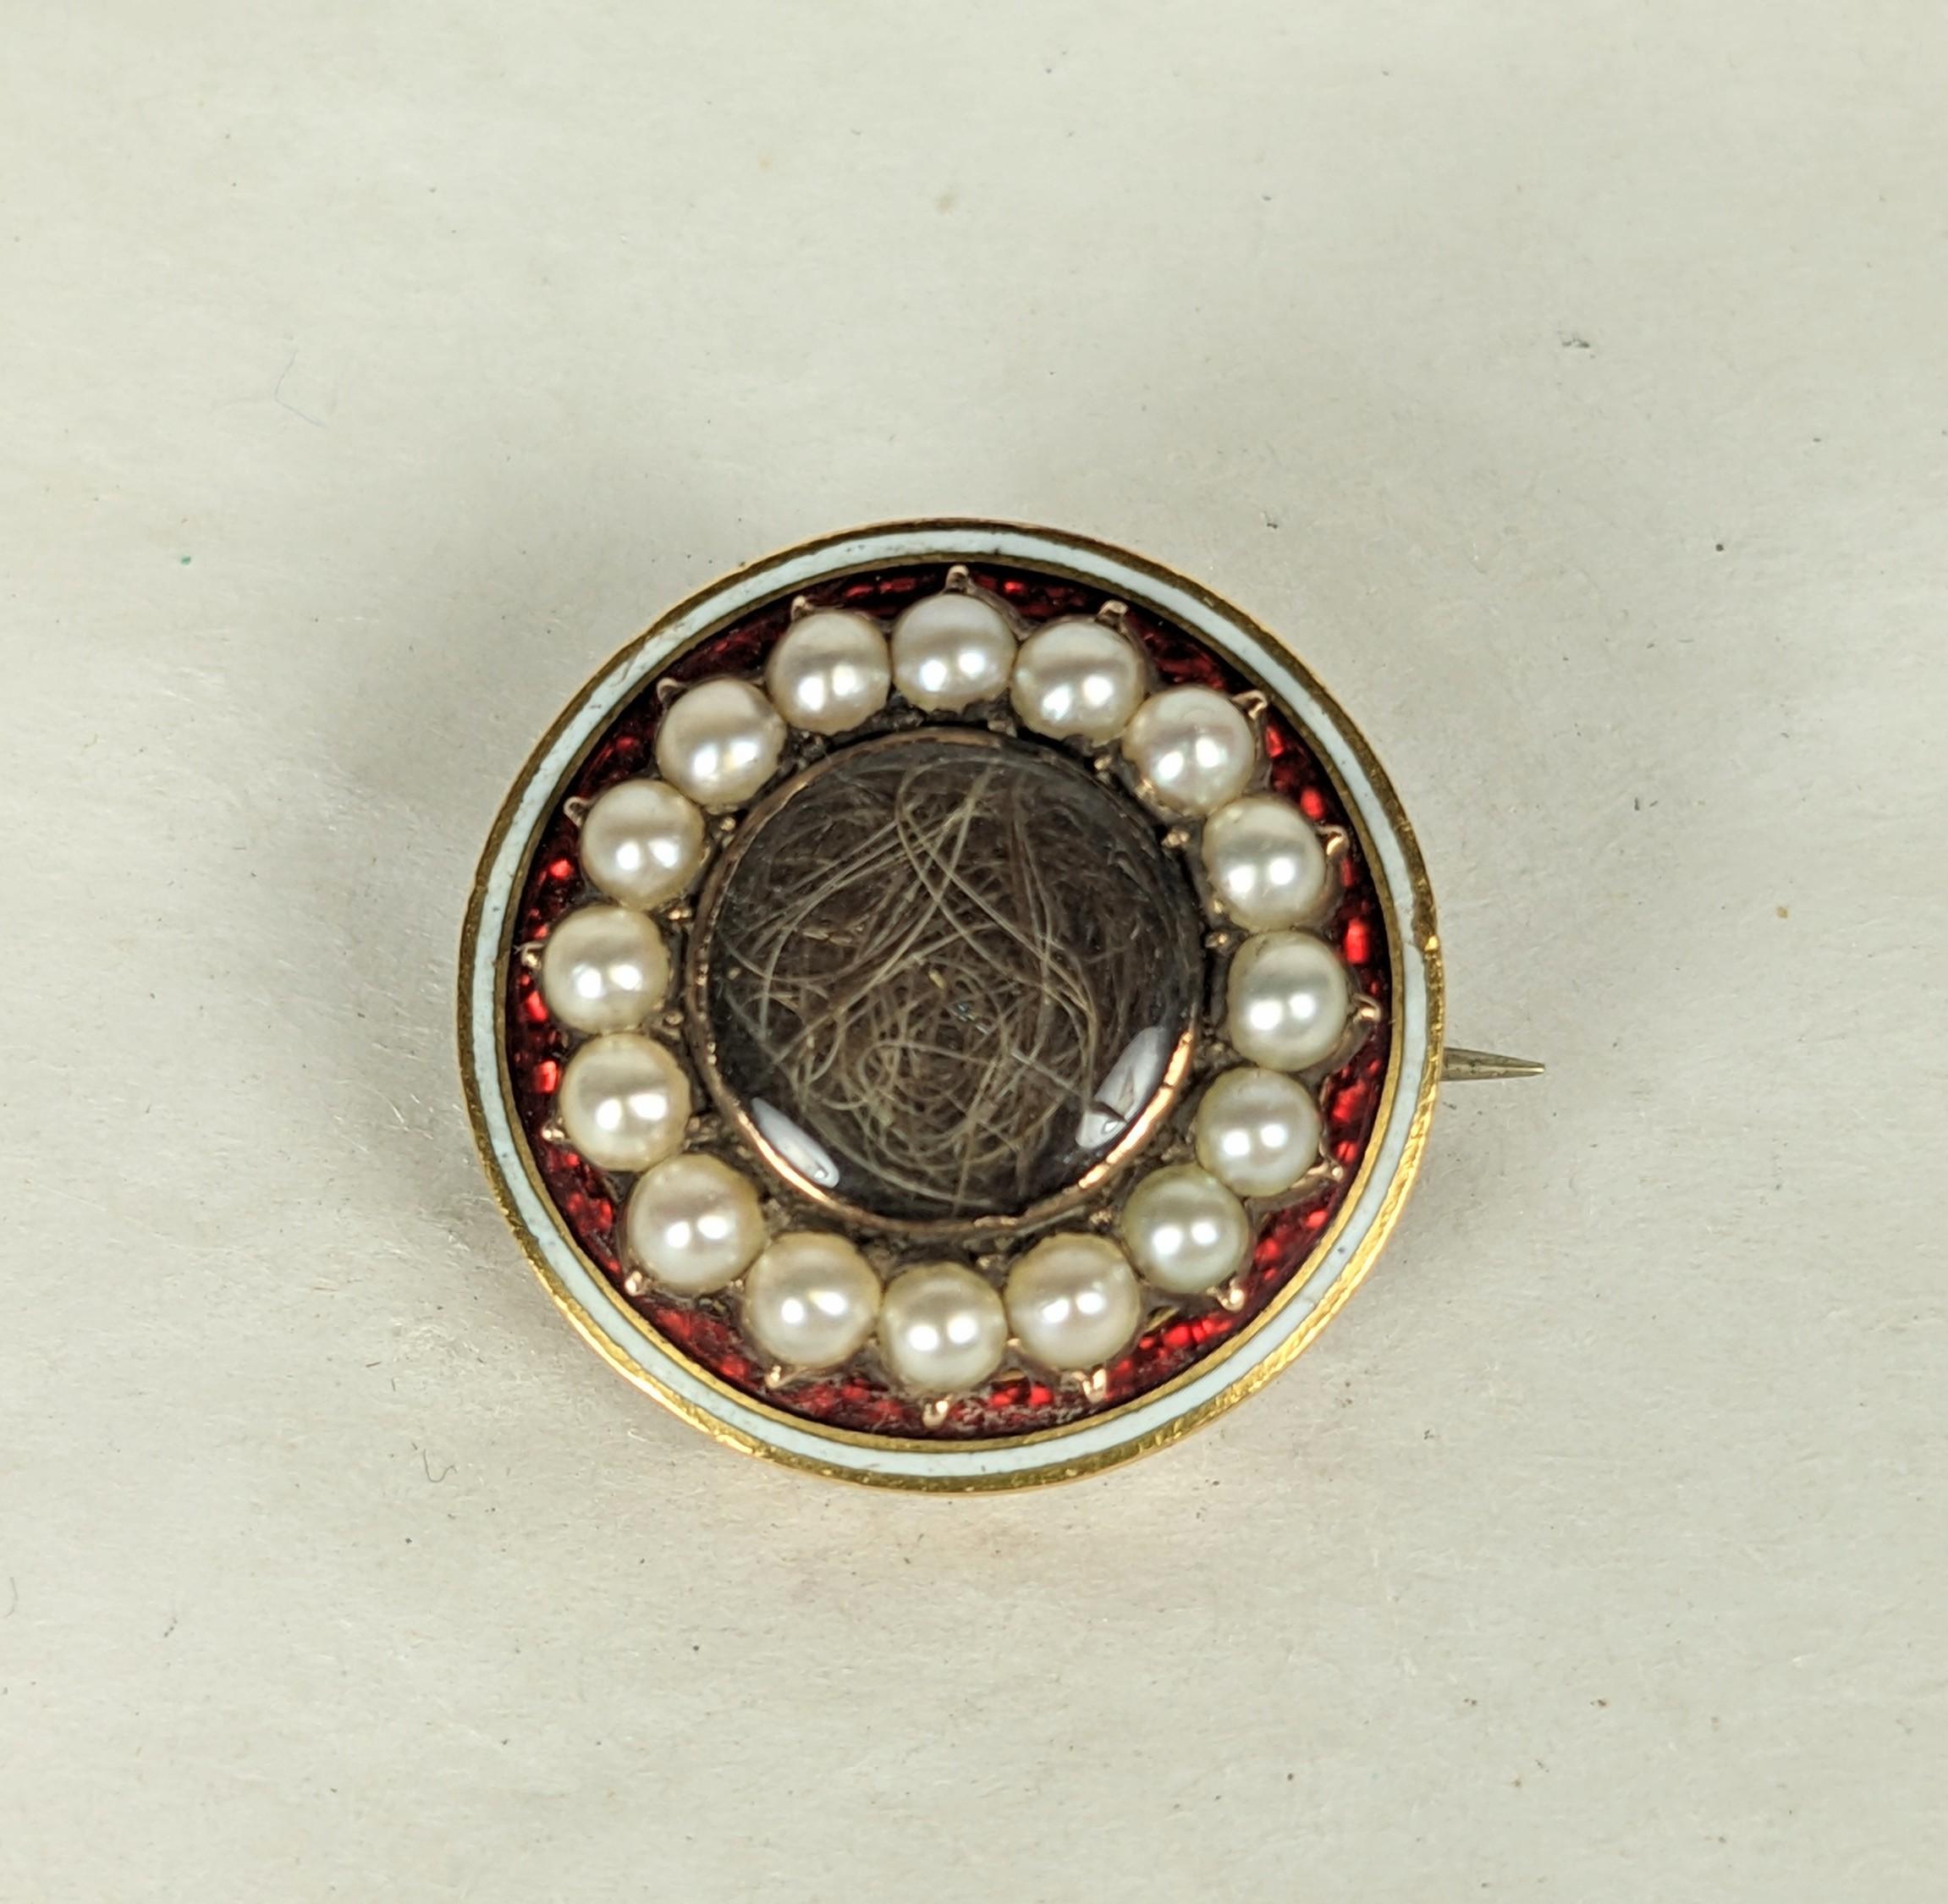 Georgian Enamel Remembrance Brooch with hair compartment under glass from the early 19th Century. Set in 10K gold with unusual ruby enamel with half seed pearls. This was originally a bracelet or necklace clasp and was transformed into a brooch